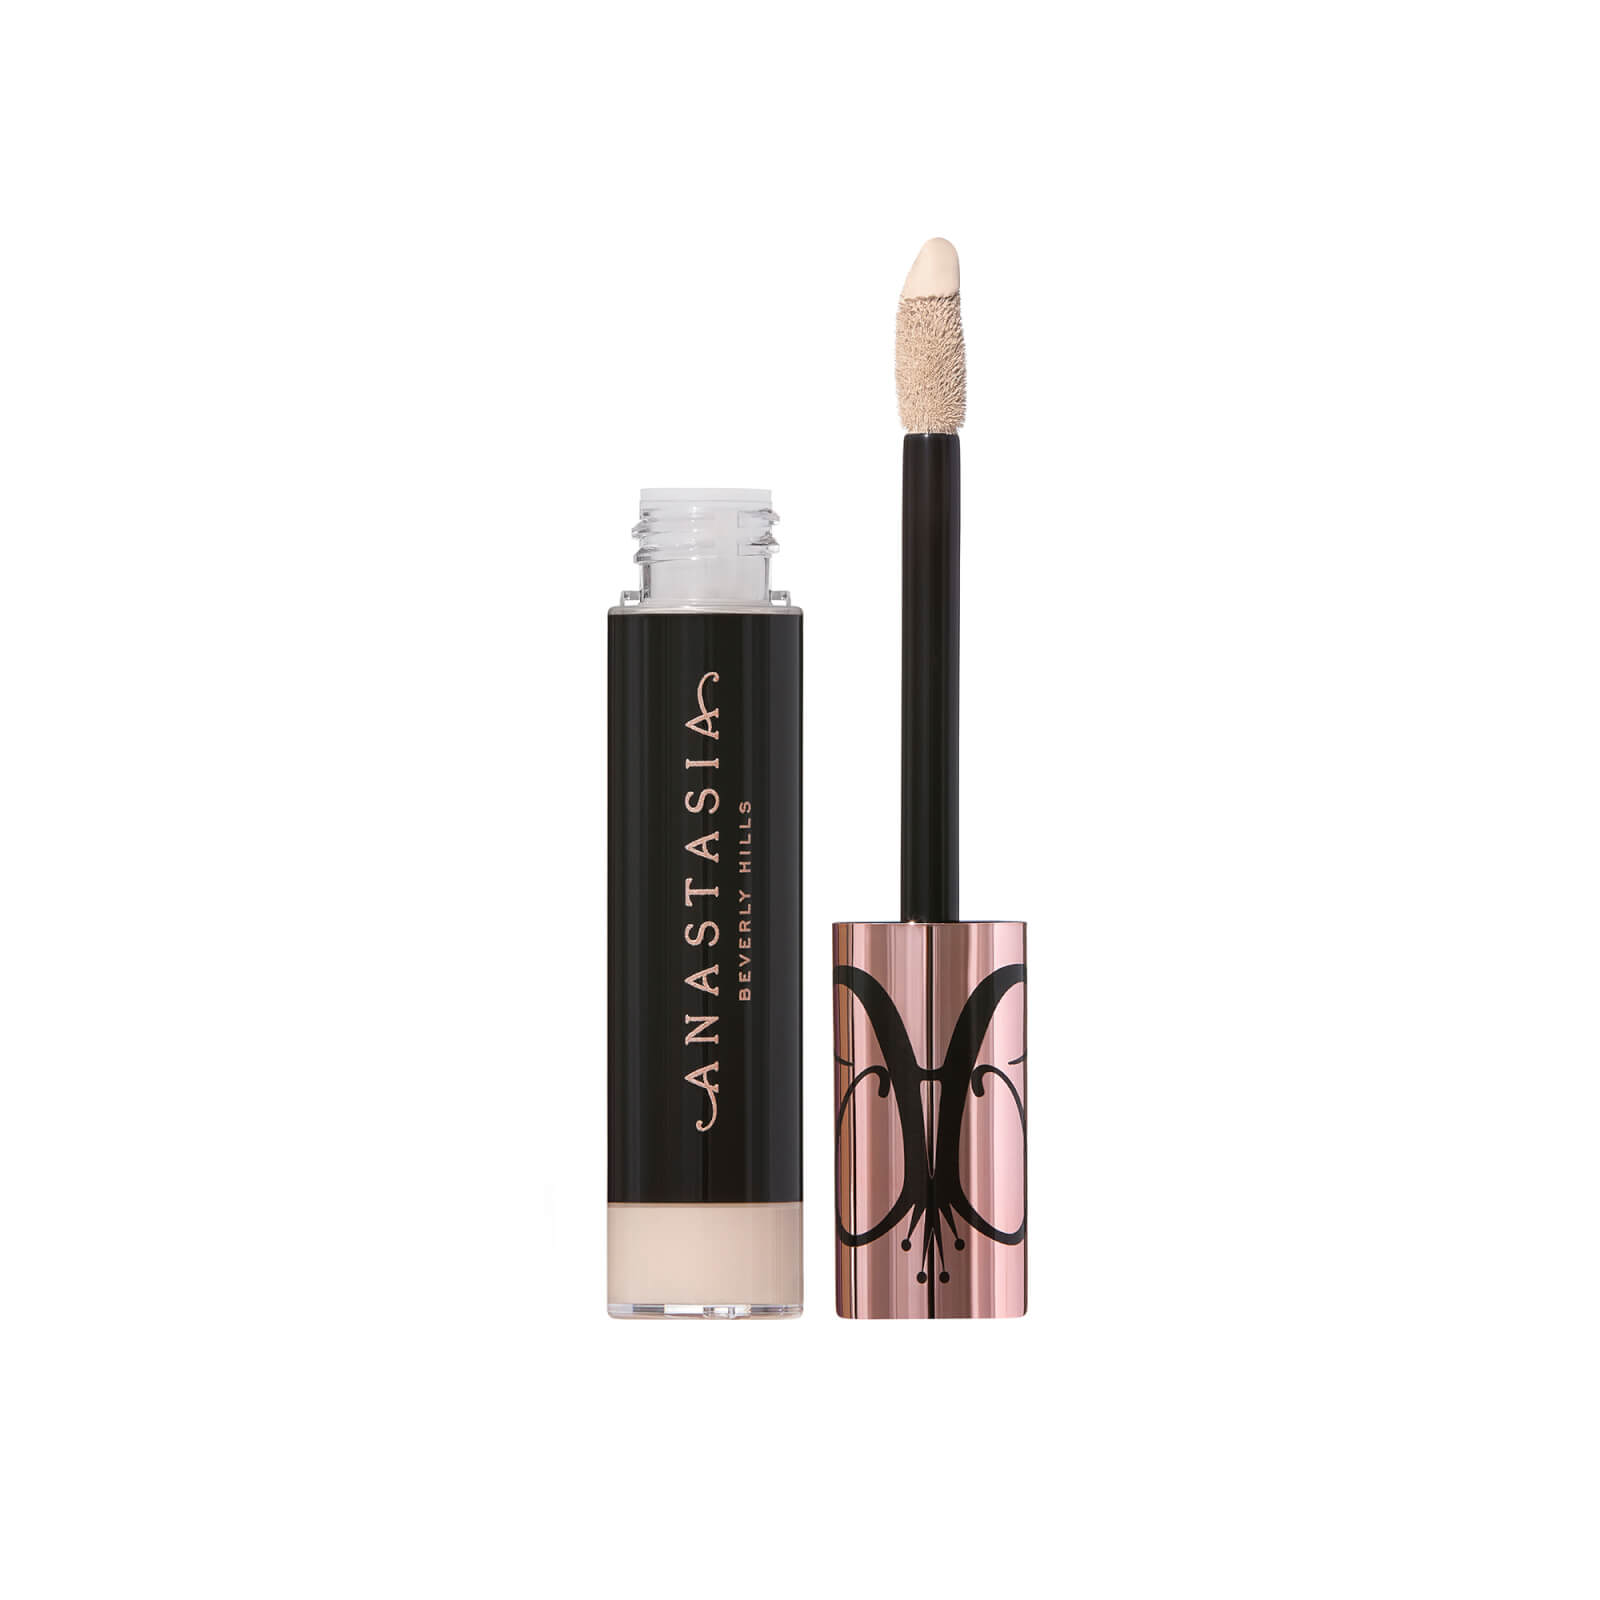 Anastasia Beverly Hills Magic Touch Concealer 12ml (Various Shades) - 4